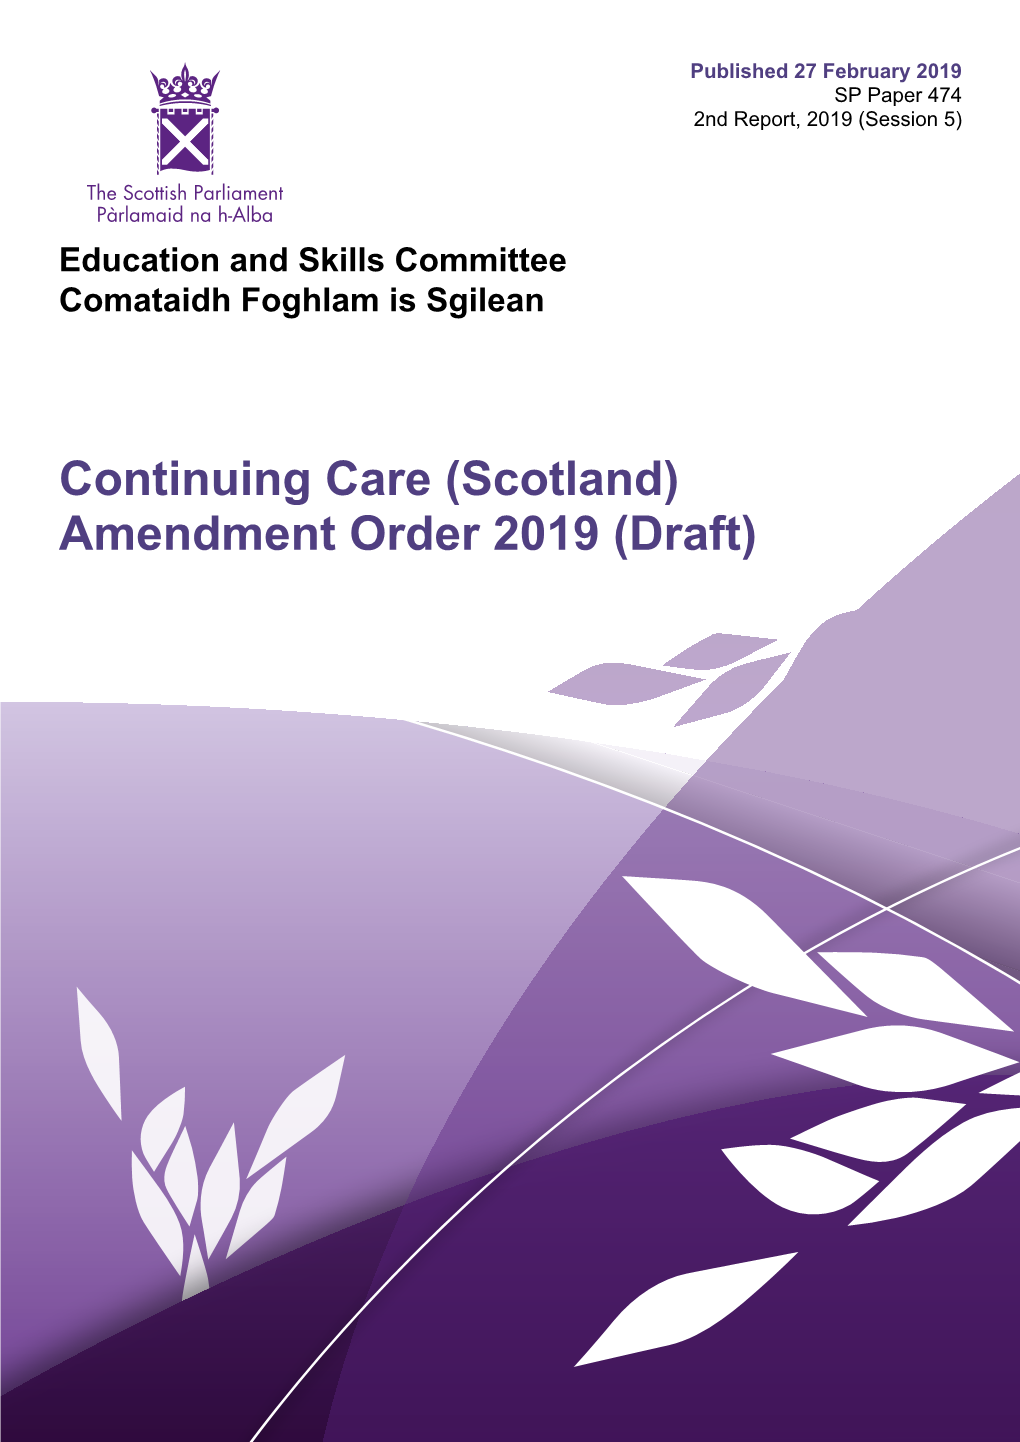 Continuing Care (Scotland) Amendment Order 2019 (Draft) Published in Scotland by the Scottish Parliamentary Corporate Body